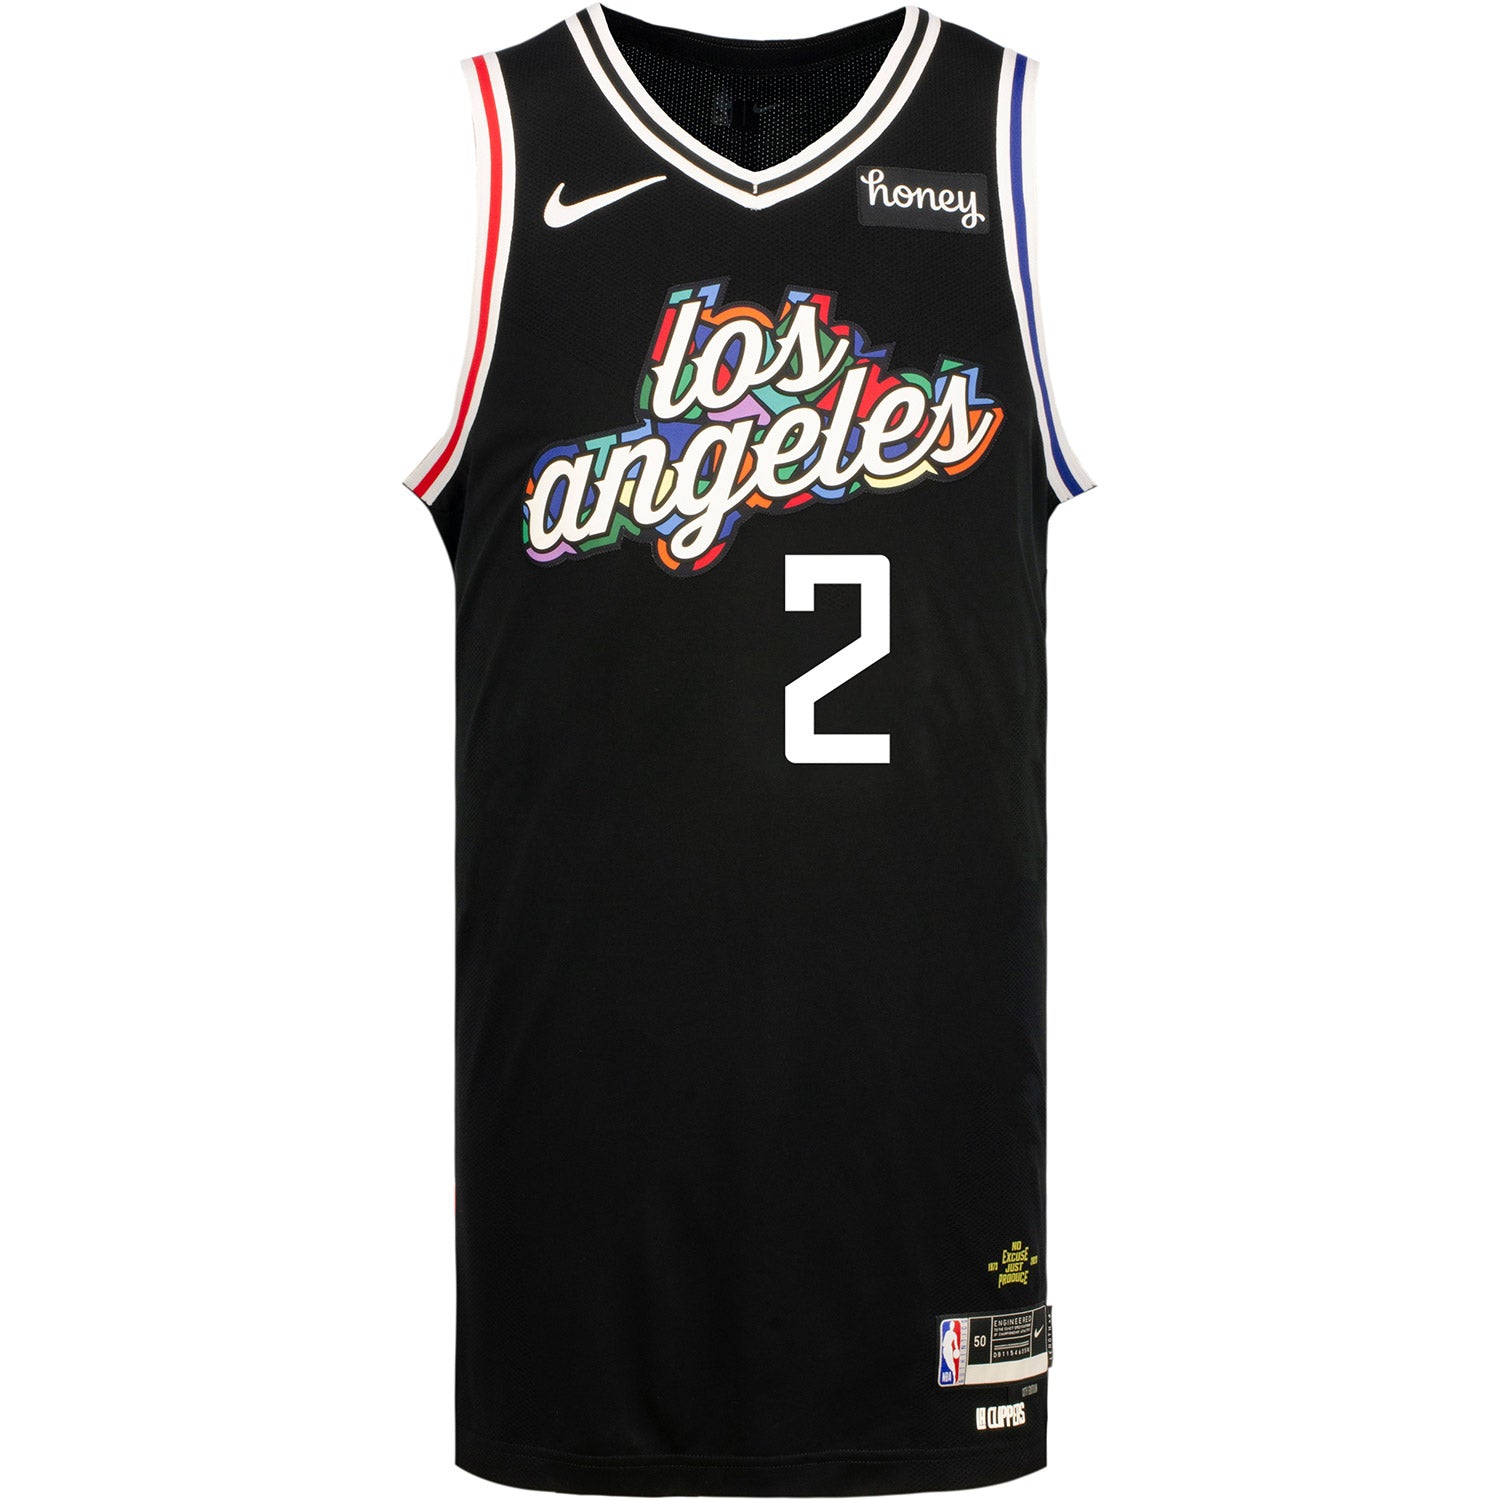 Los Angeles Clippers Jersey